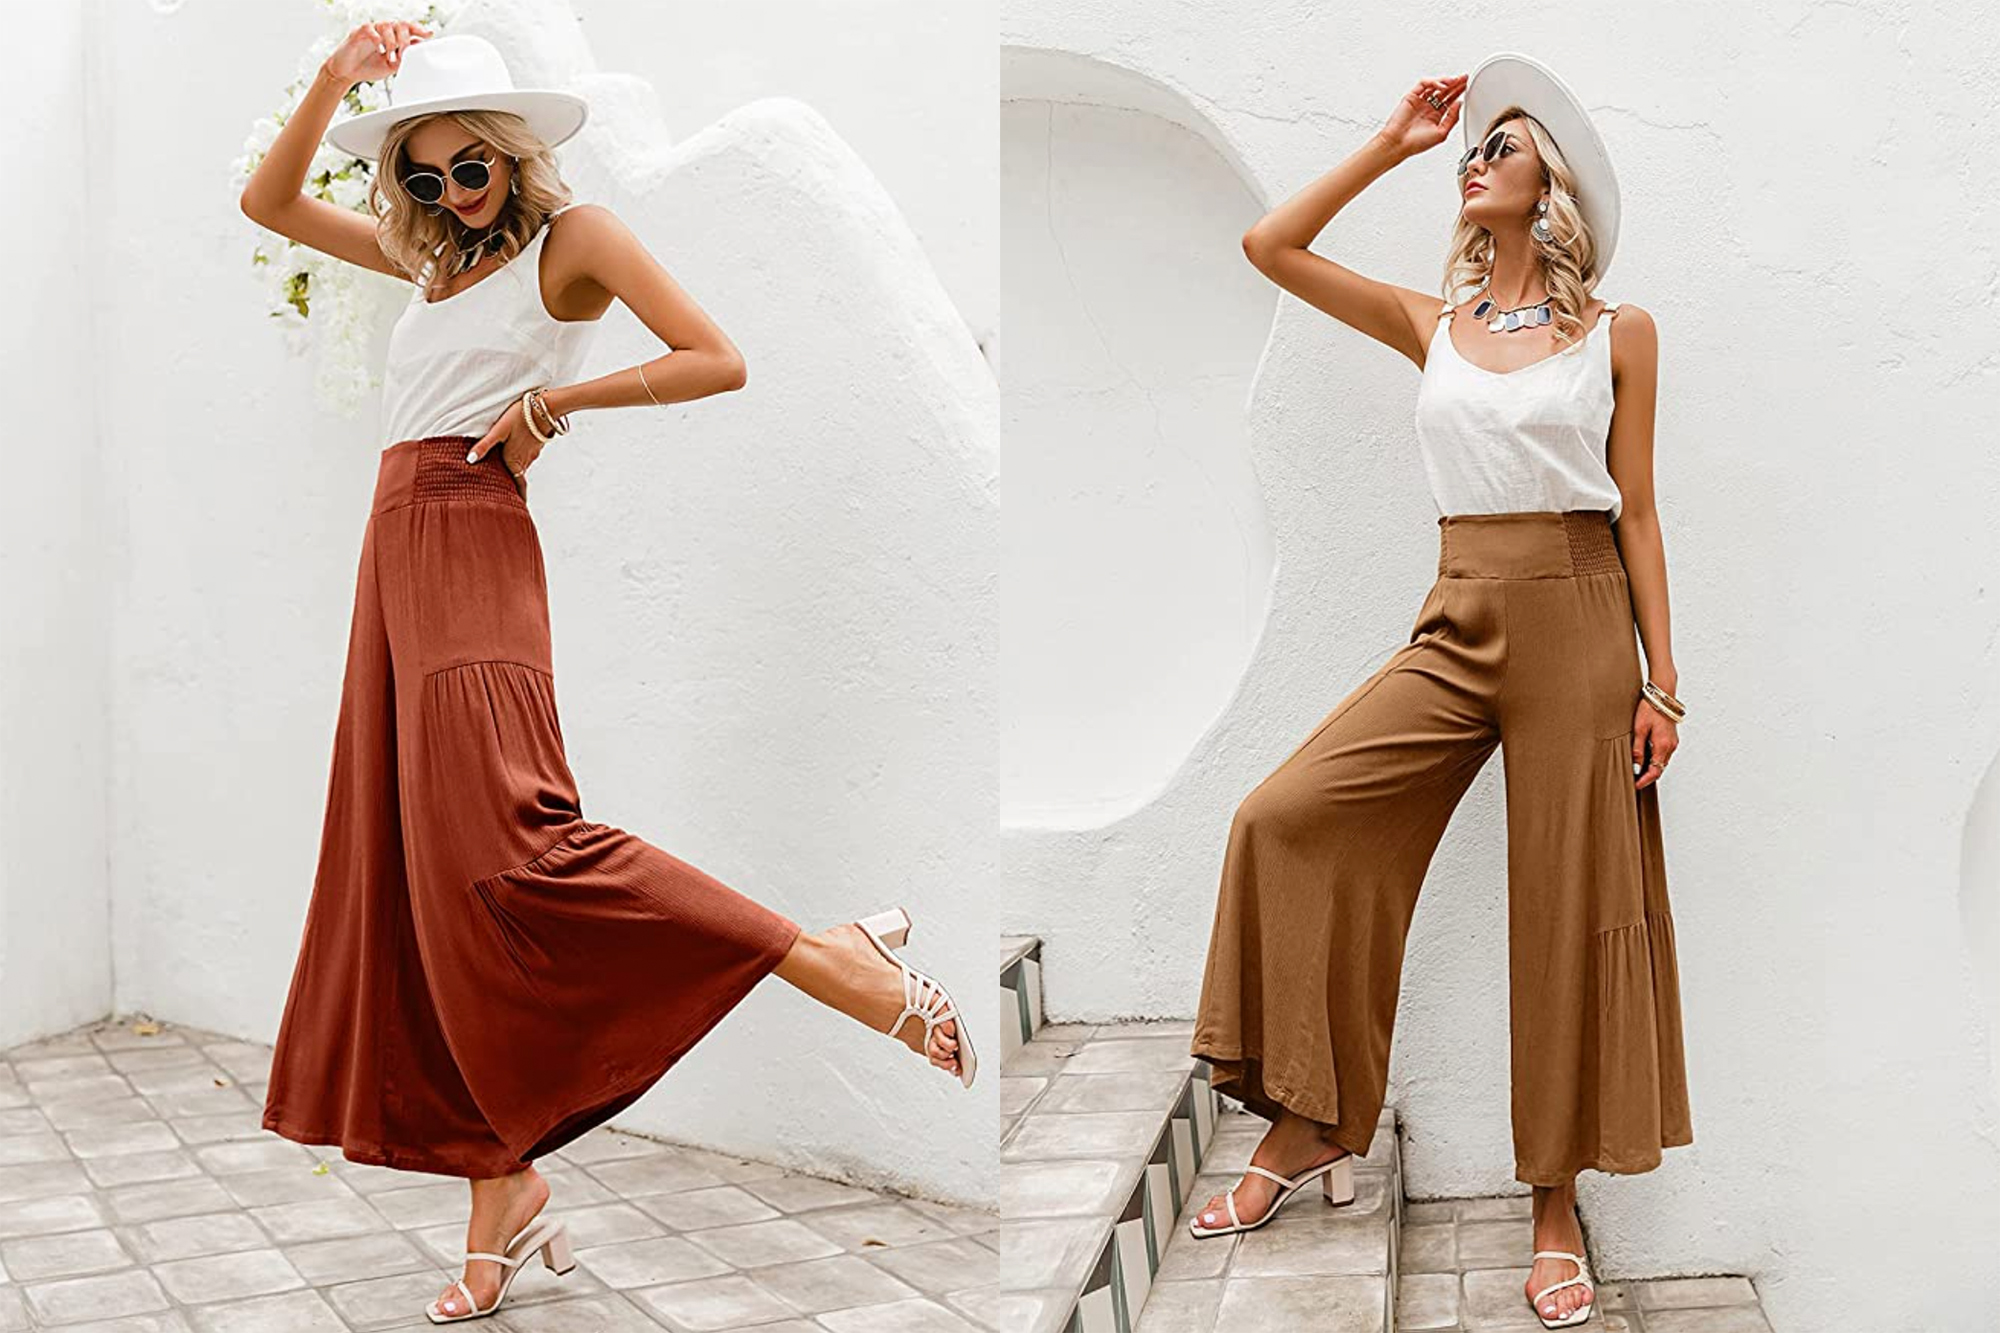 Women's High Waisted Plicated Side Pocket Wide Leg Flowy Solid Palazzo  Casual Cotton Pants - Halara